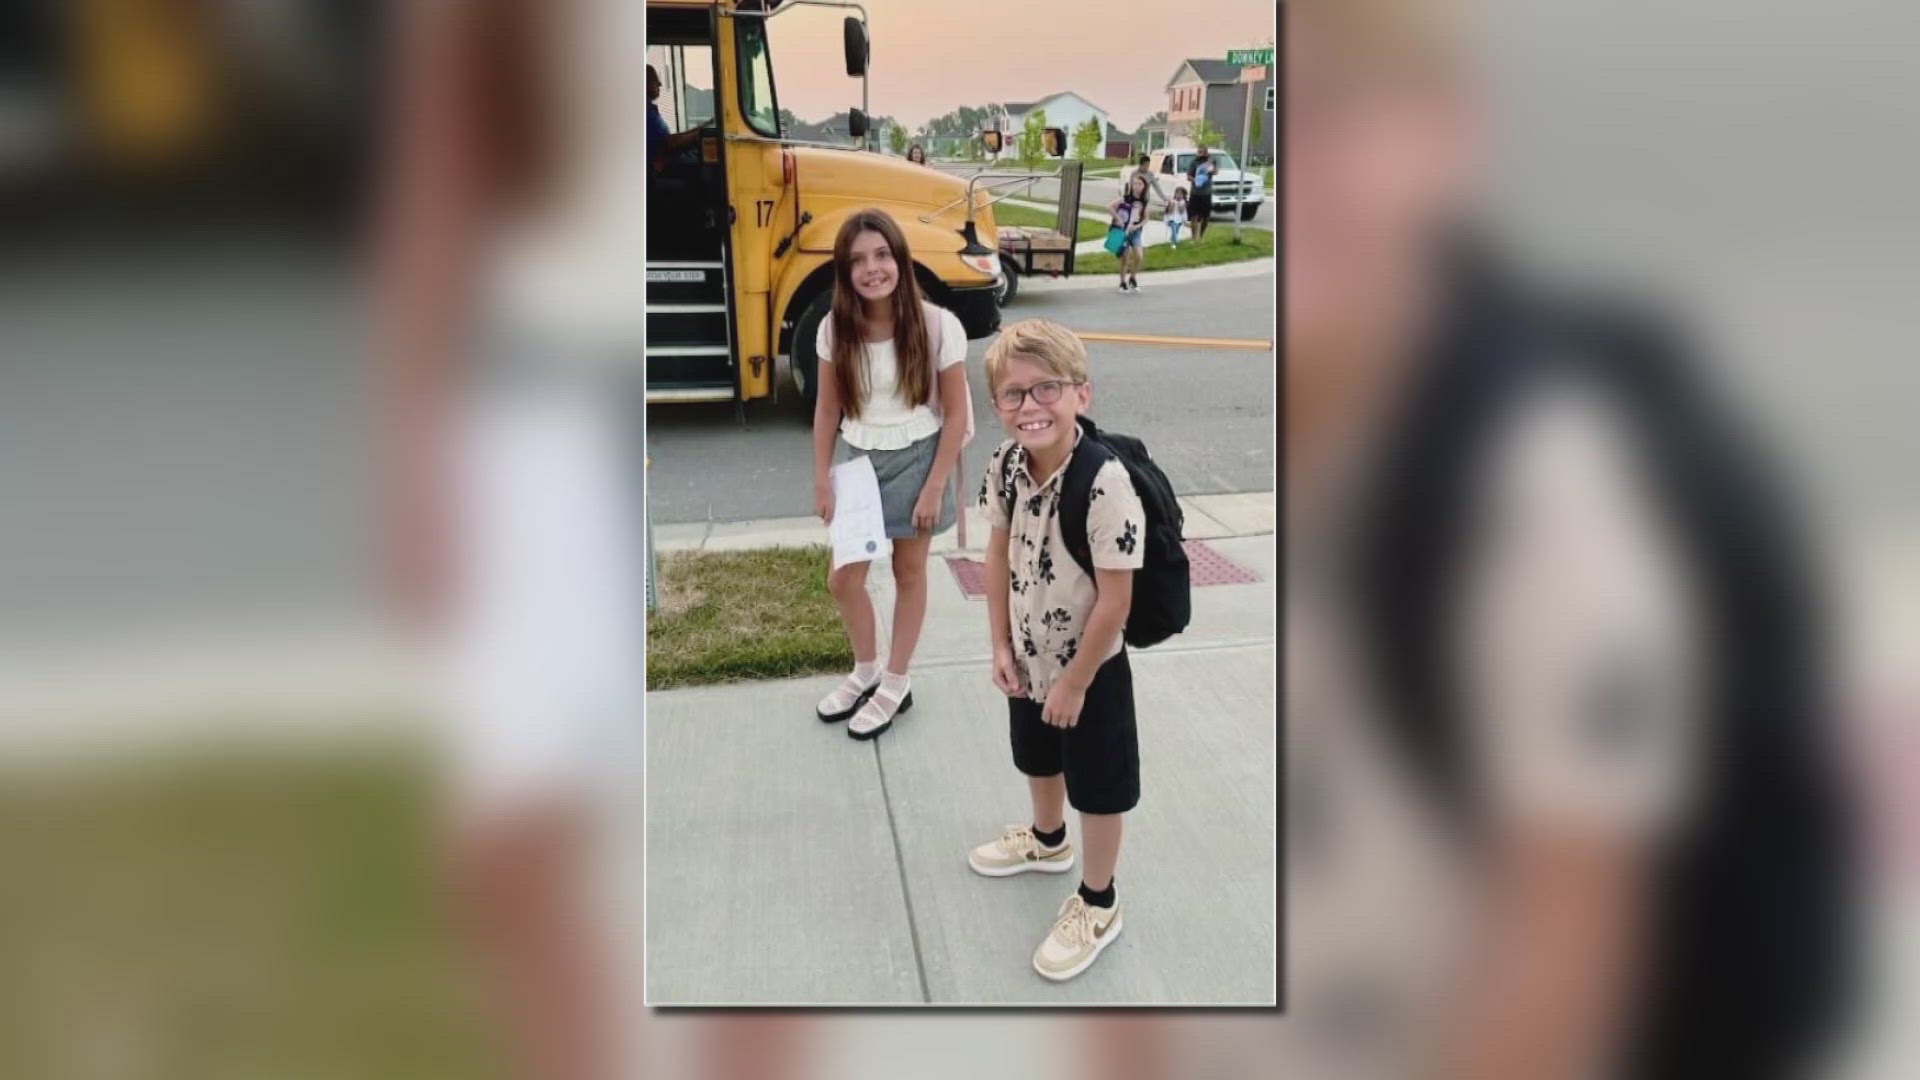 The parents say their son was bullied relentlessly and the school knew about it.